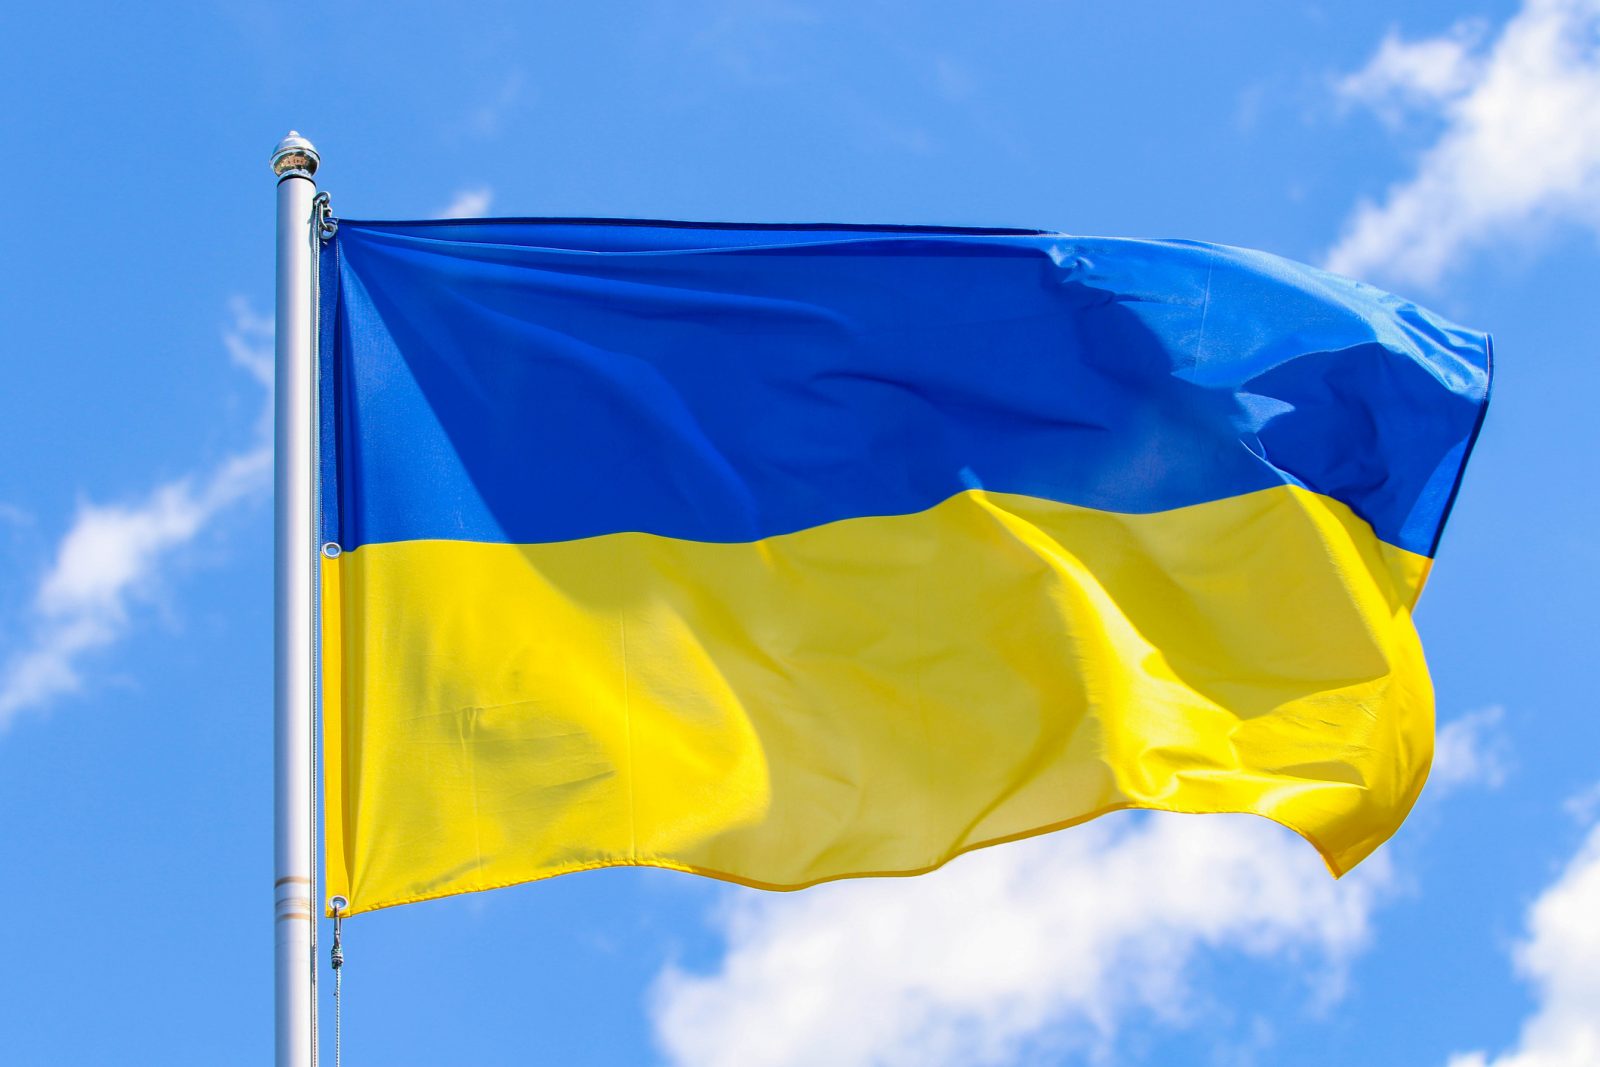 The Ukrainian flag, with blue on the top and yellow on the bottom, flies on the right side of a flagpole against a blue sky.